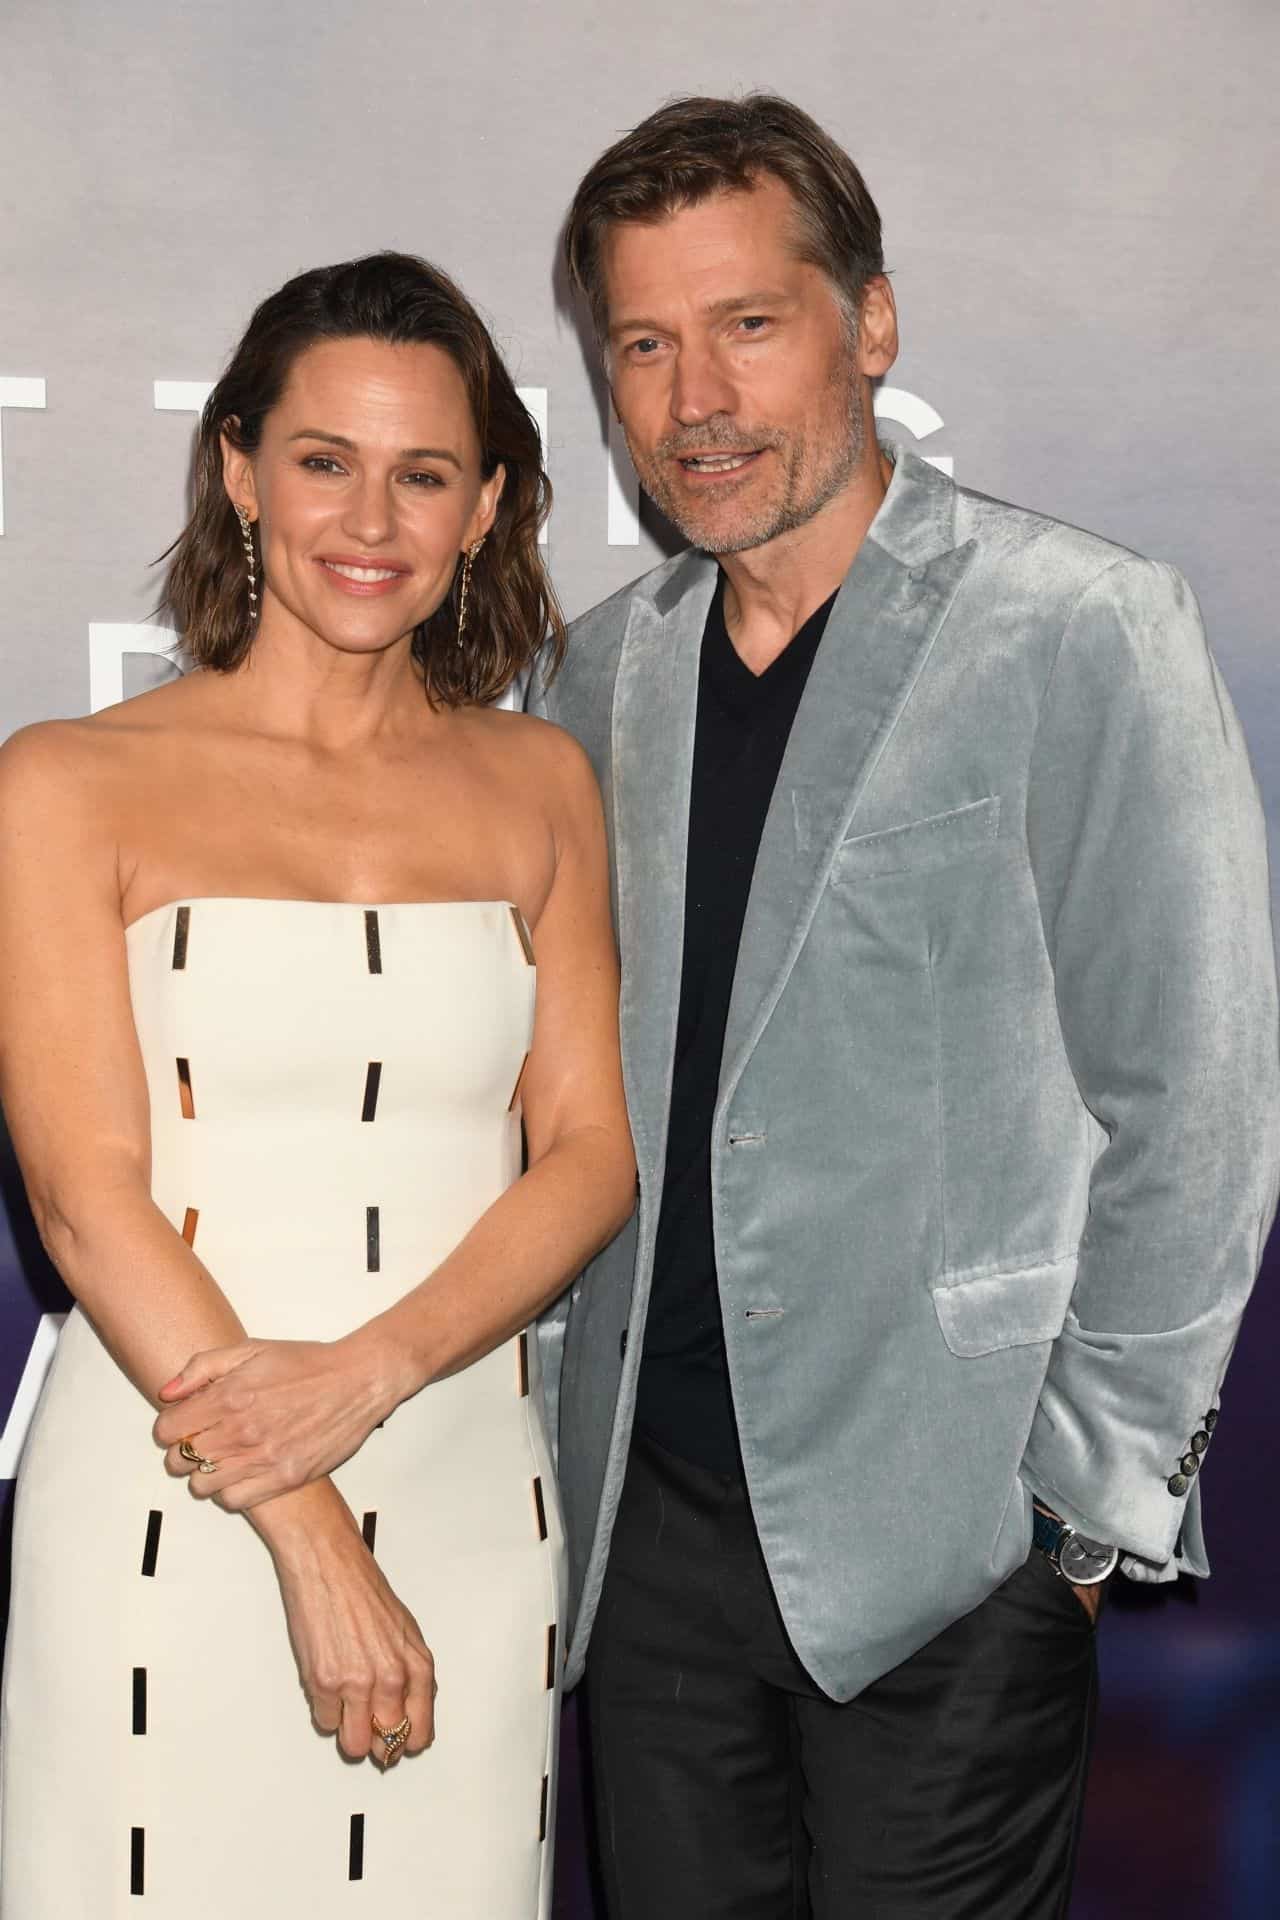 Jennifer Garner Shines at "The Last Thing He Told Me" Premiere